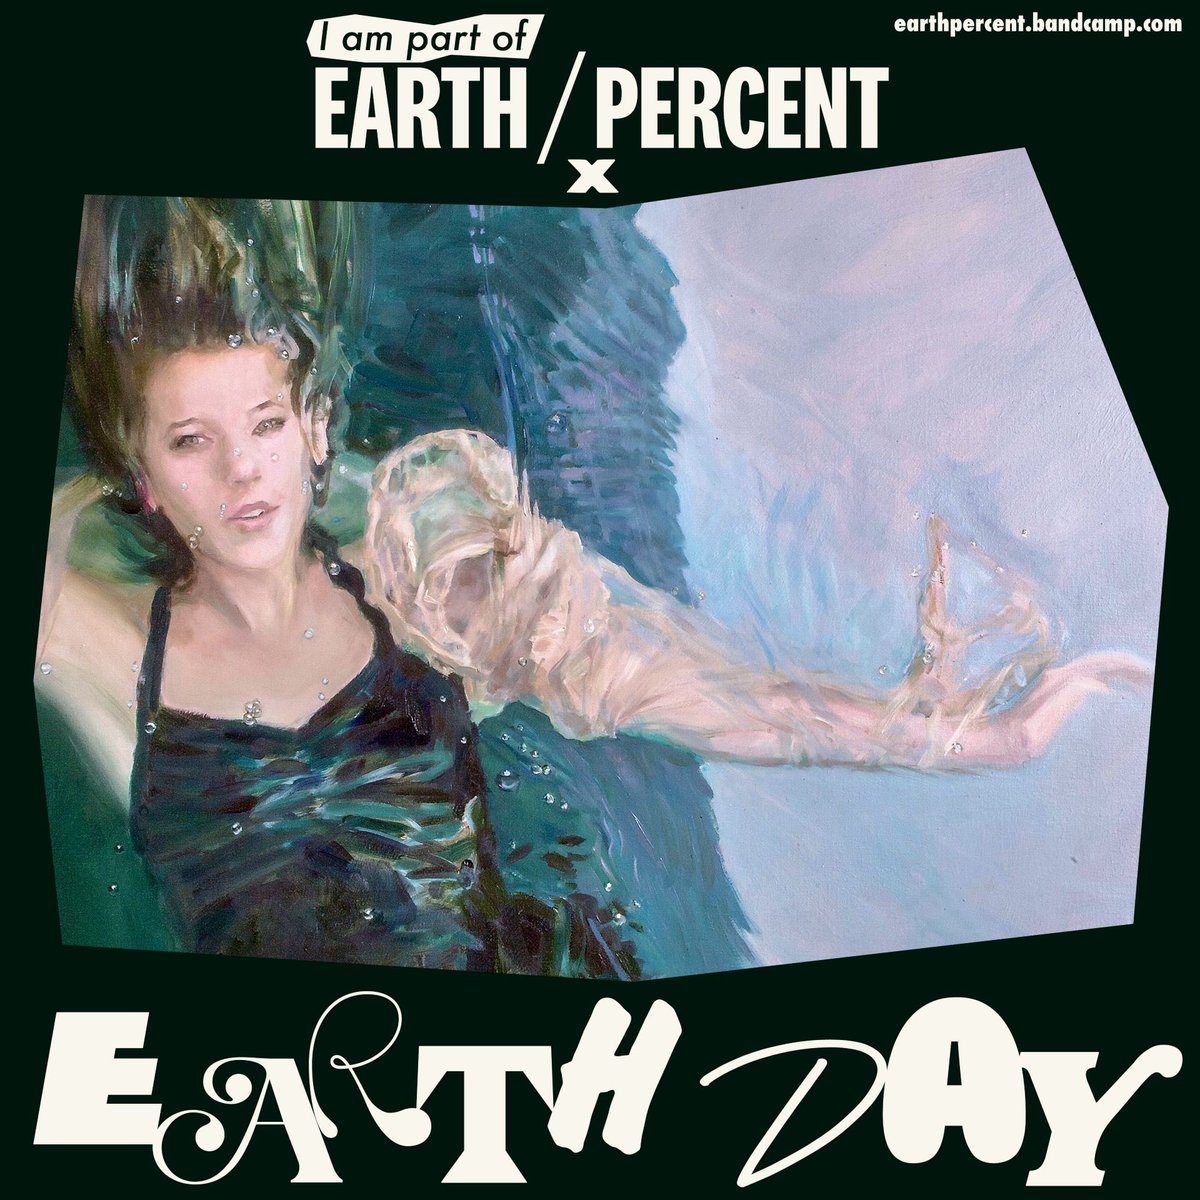 Honoured to be part of @earthpercentorg’s campaign where over 100 artists have contributed exclusive tracks via @earthpercentorg’s @Bandcamp page to support organisations doing vital work to help tackle the climate emergency. 
#earthpercentearthday #EarthDay2022